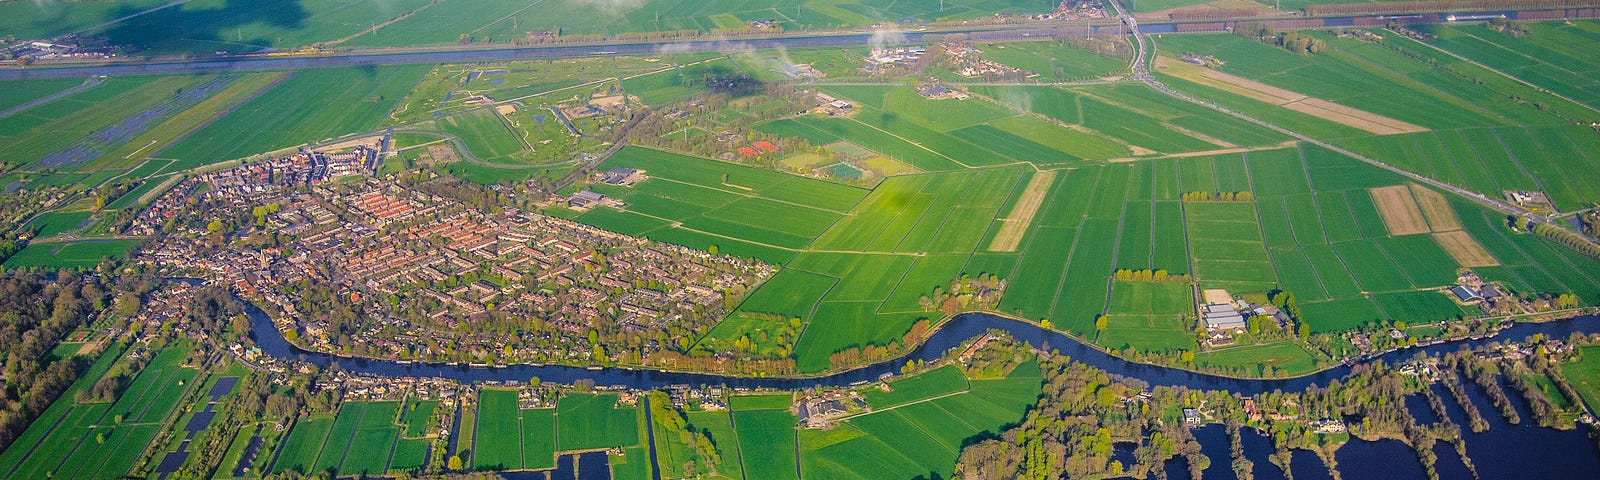 this is a photo of an overhead view of part of the Netherlands